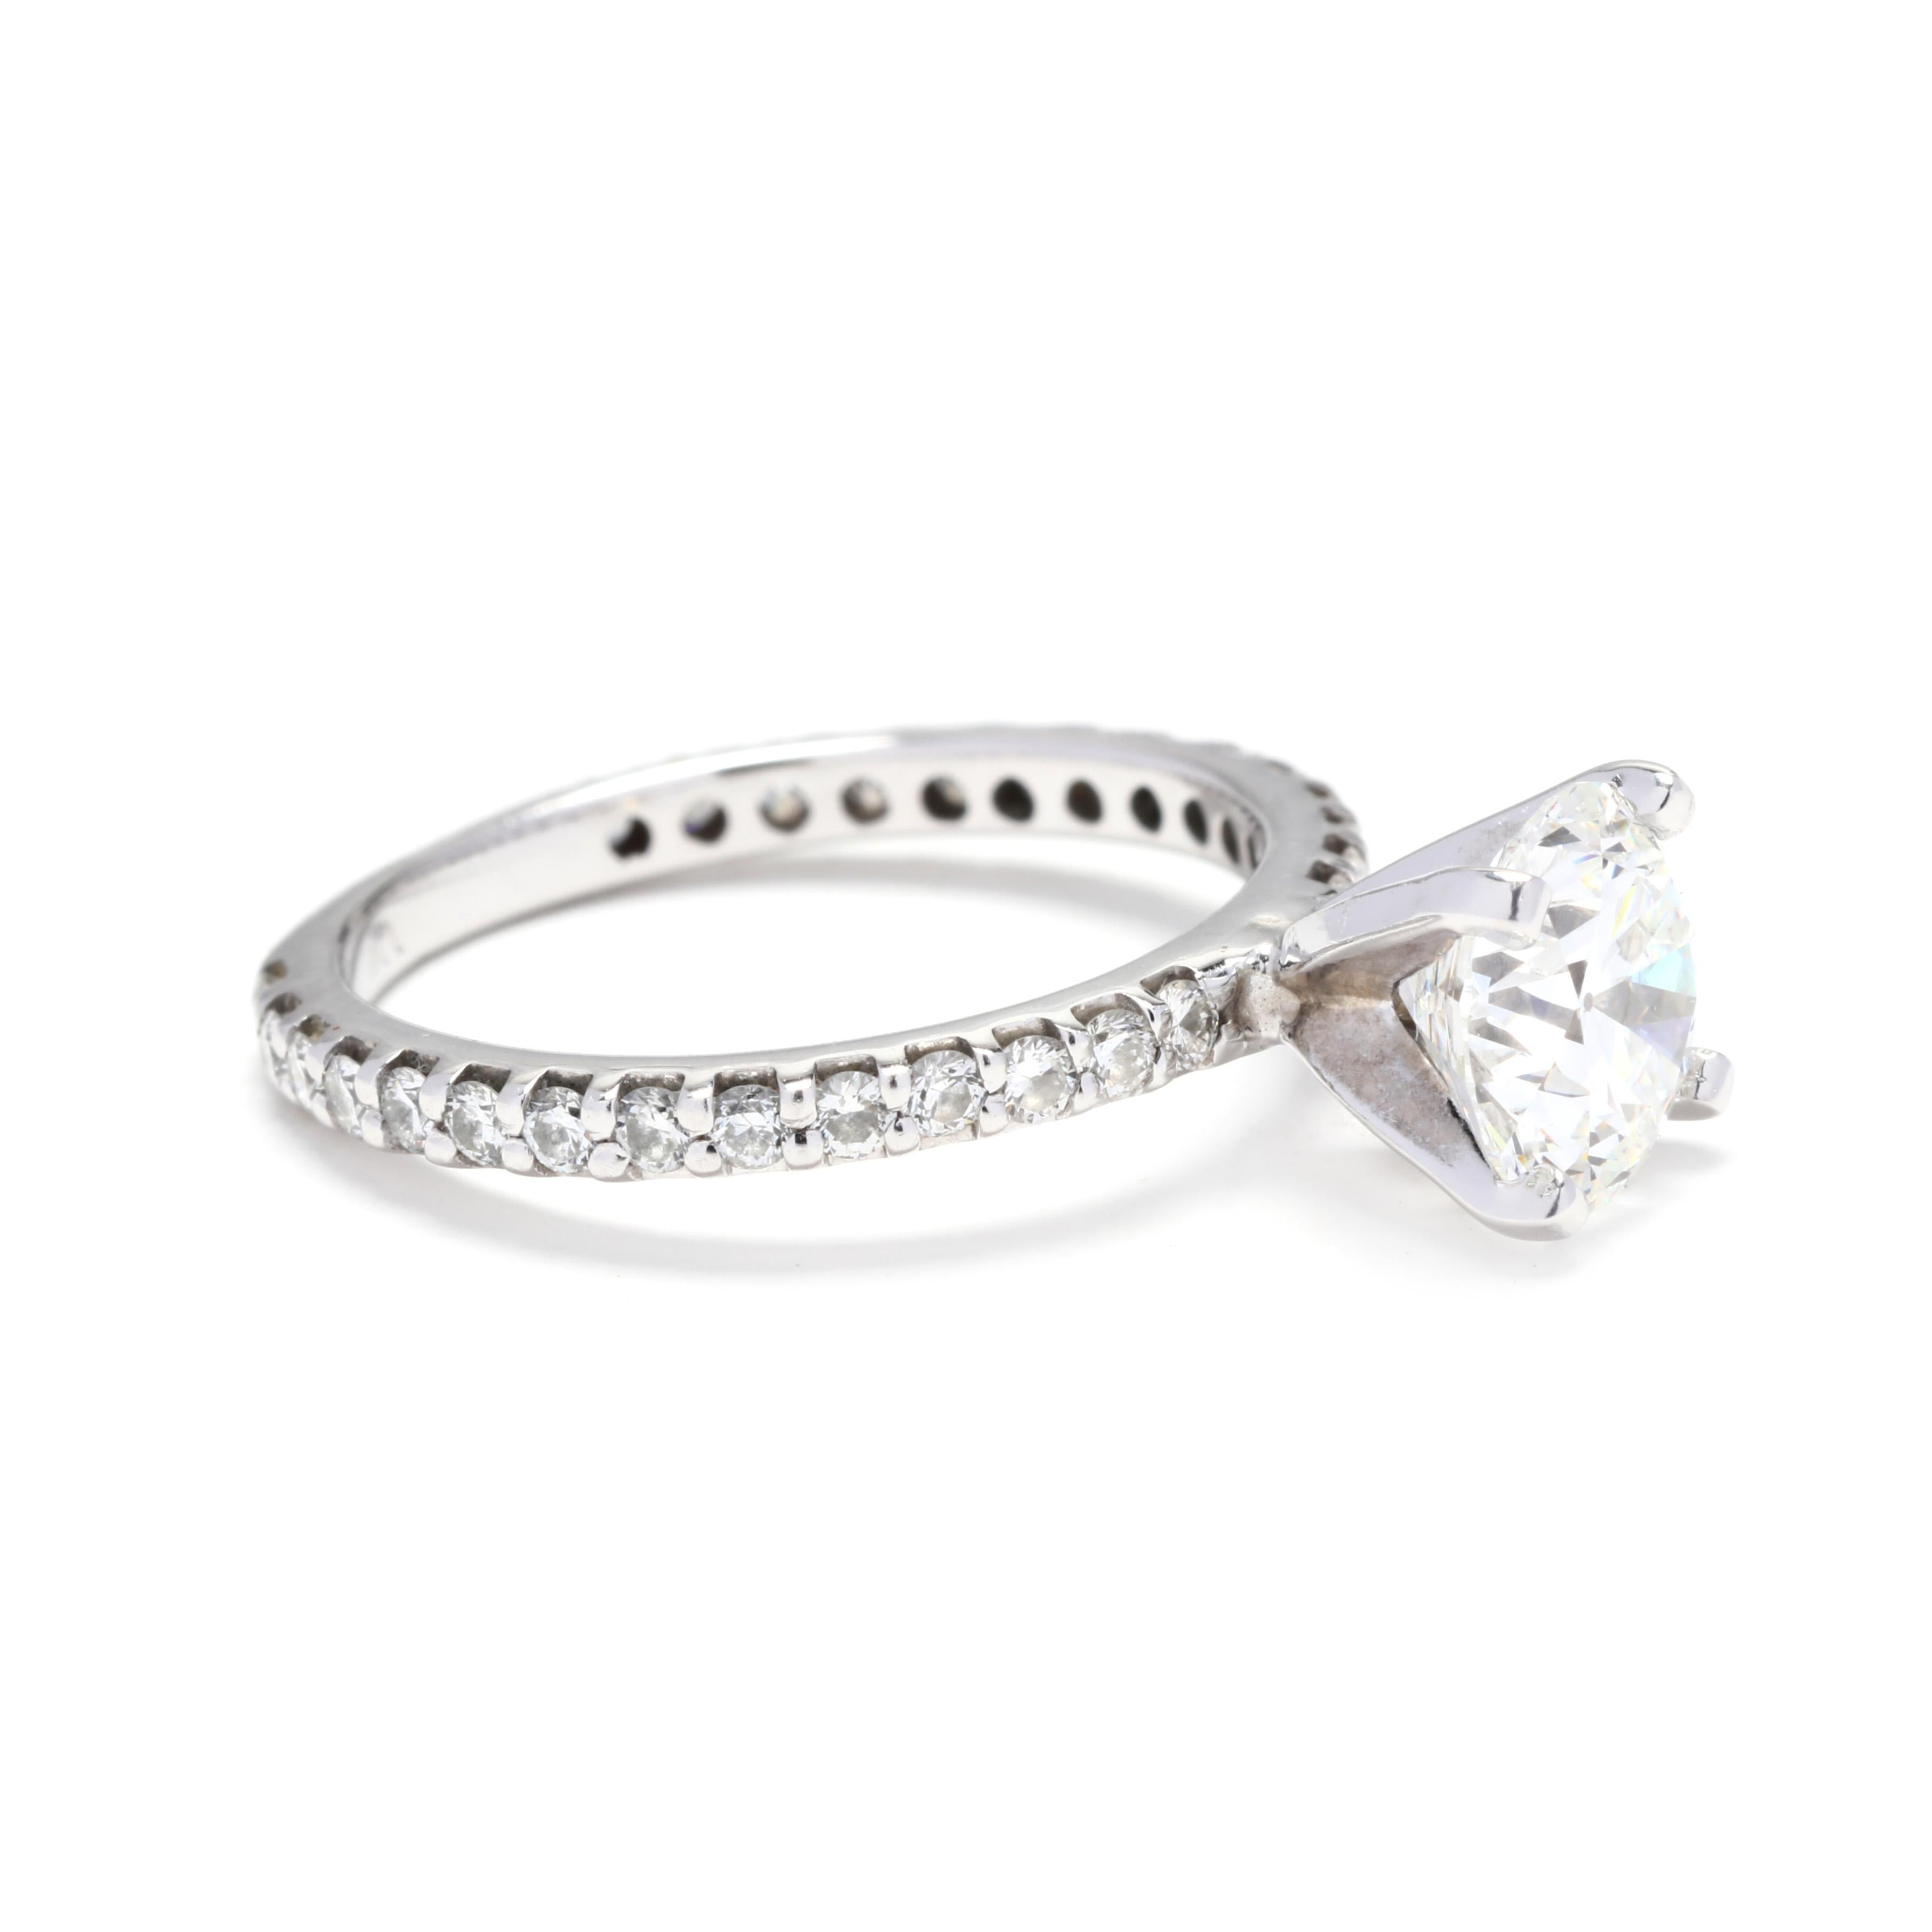 14k white gold GIA 1.53ct round diamond engagement ring. An impressive solitaire engagement ring with a 1.53 carat center, round brilliant cut diamond. The diamonds is set in four prongs. The setting has round diamonds set three-quarters of the way